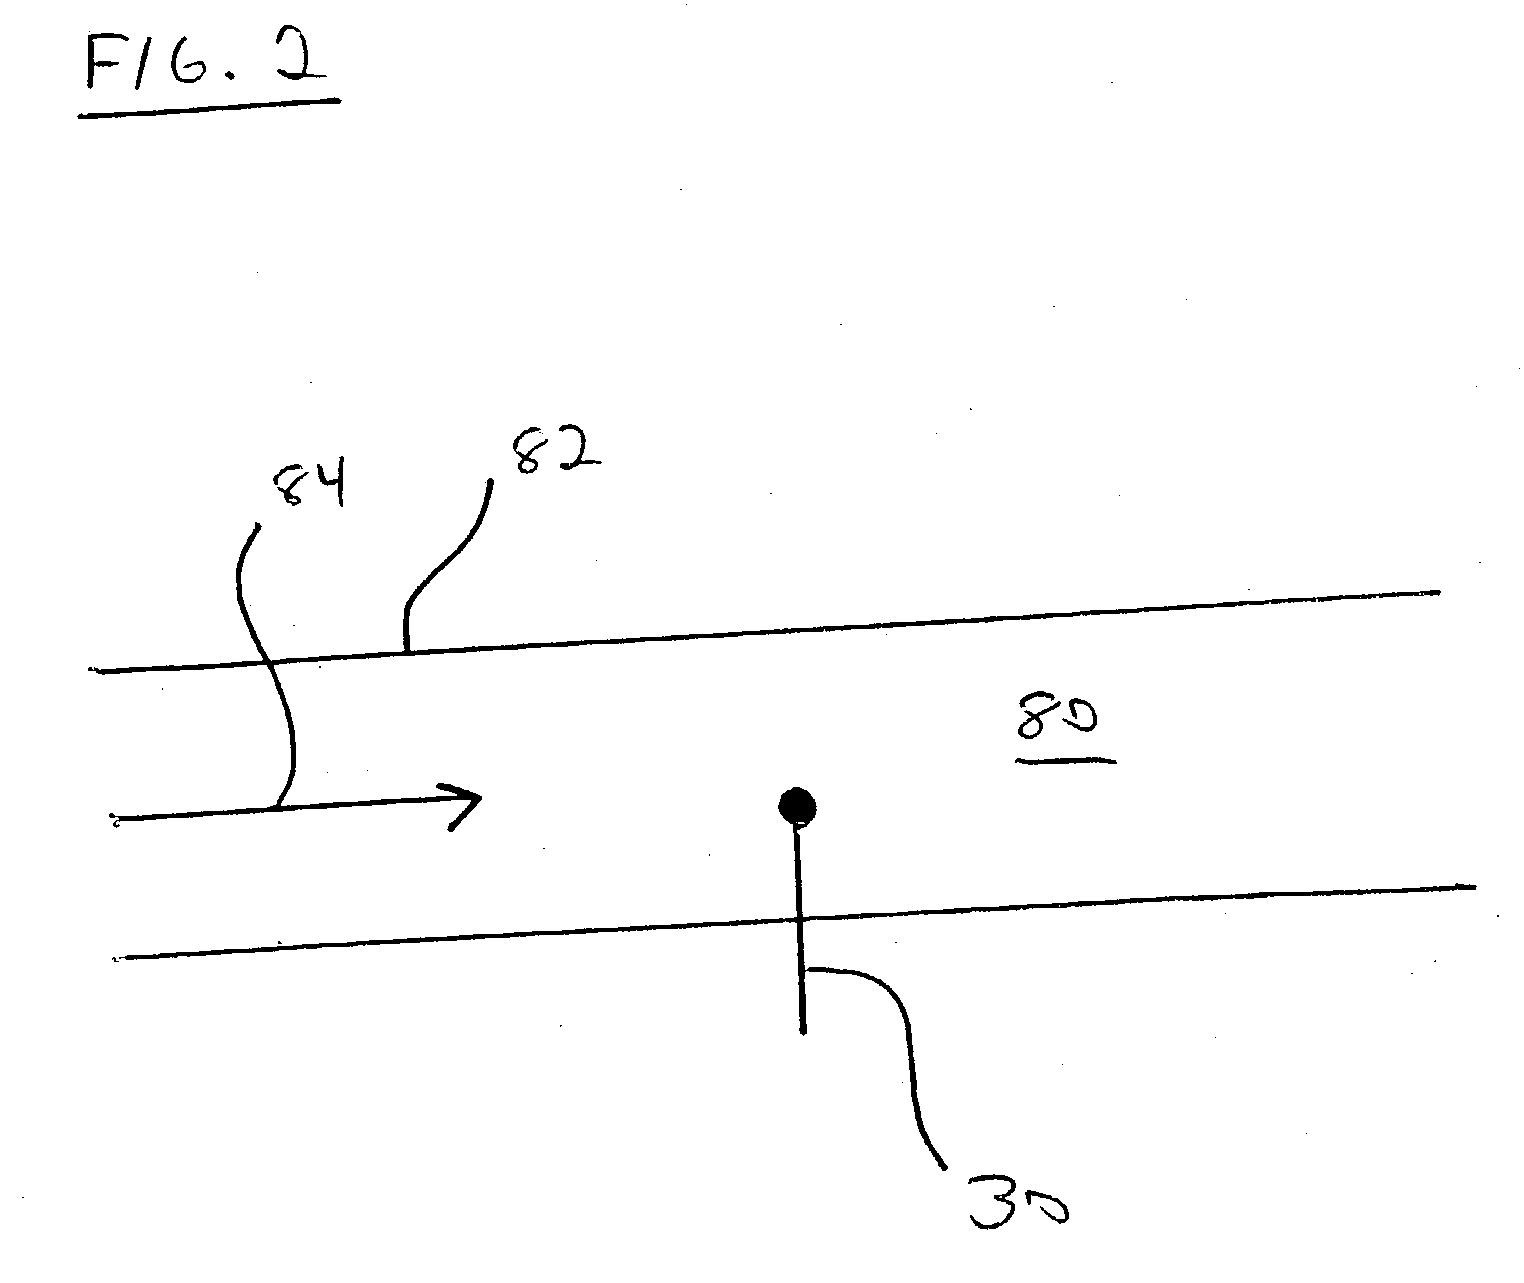 System and method for measuring the velocity of fluids